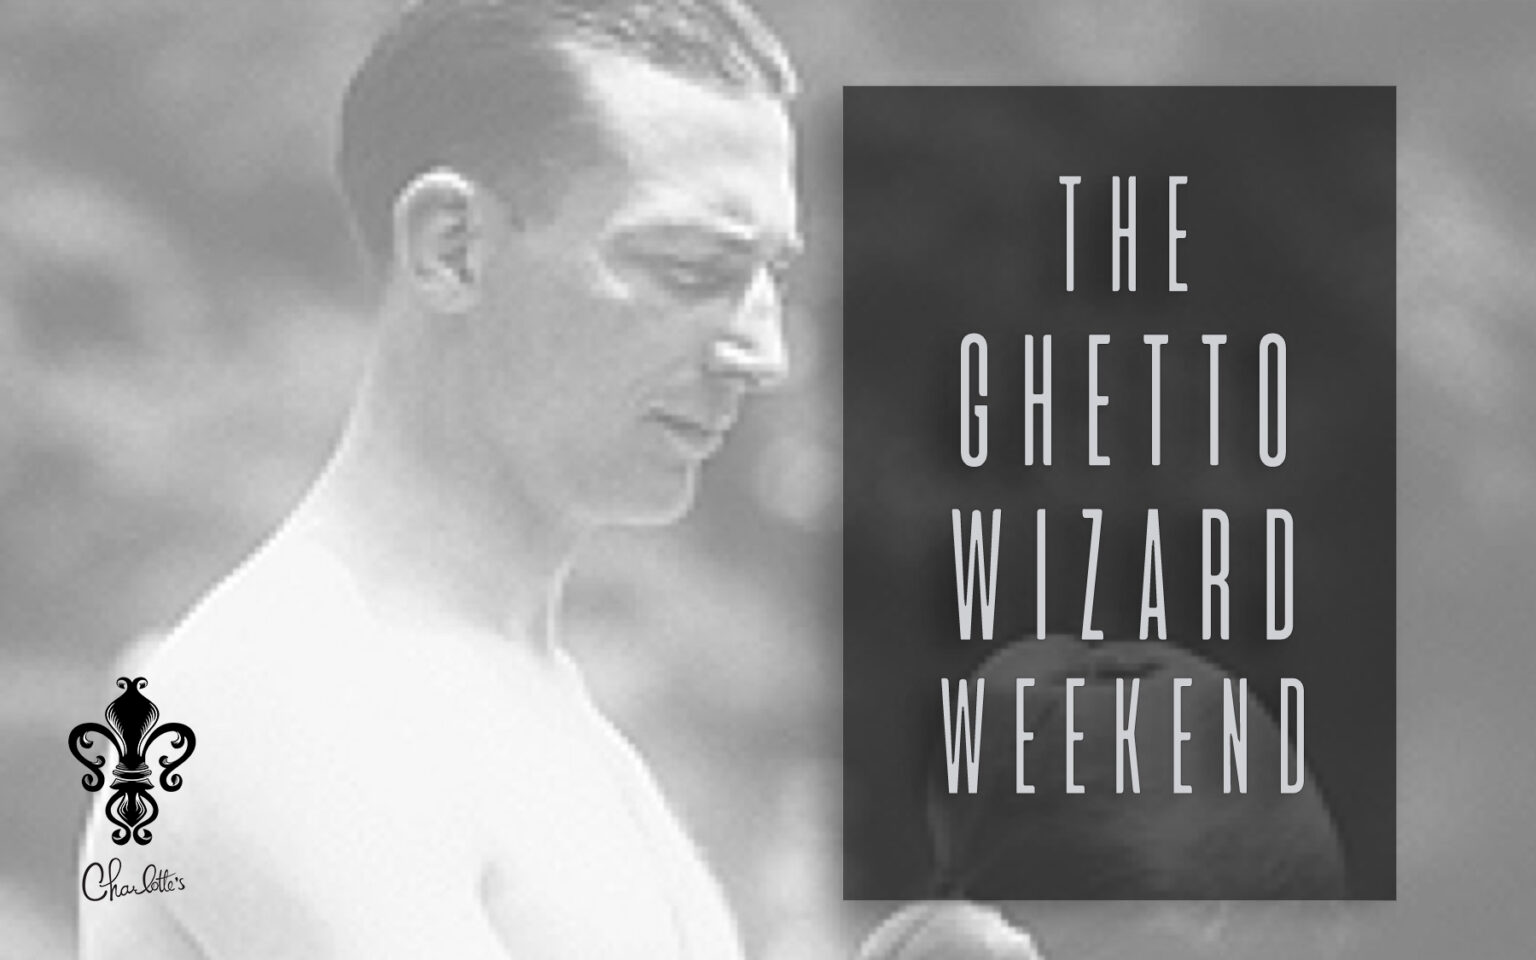 The Ghetto Wizard Weekend